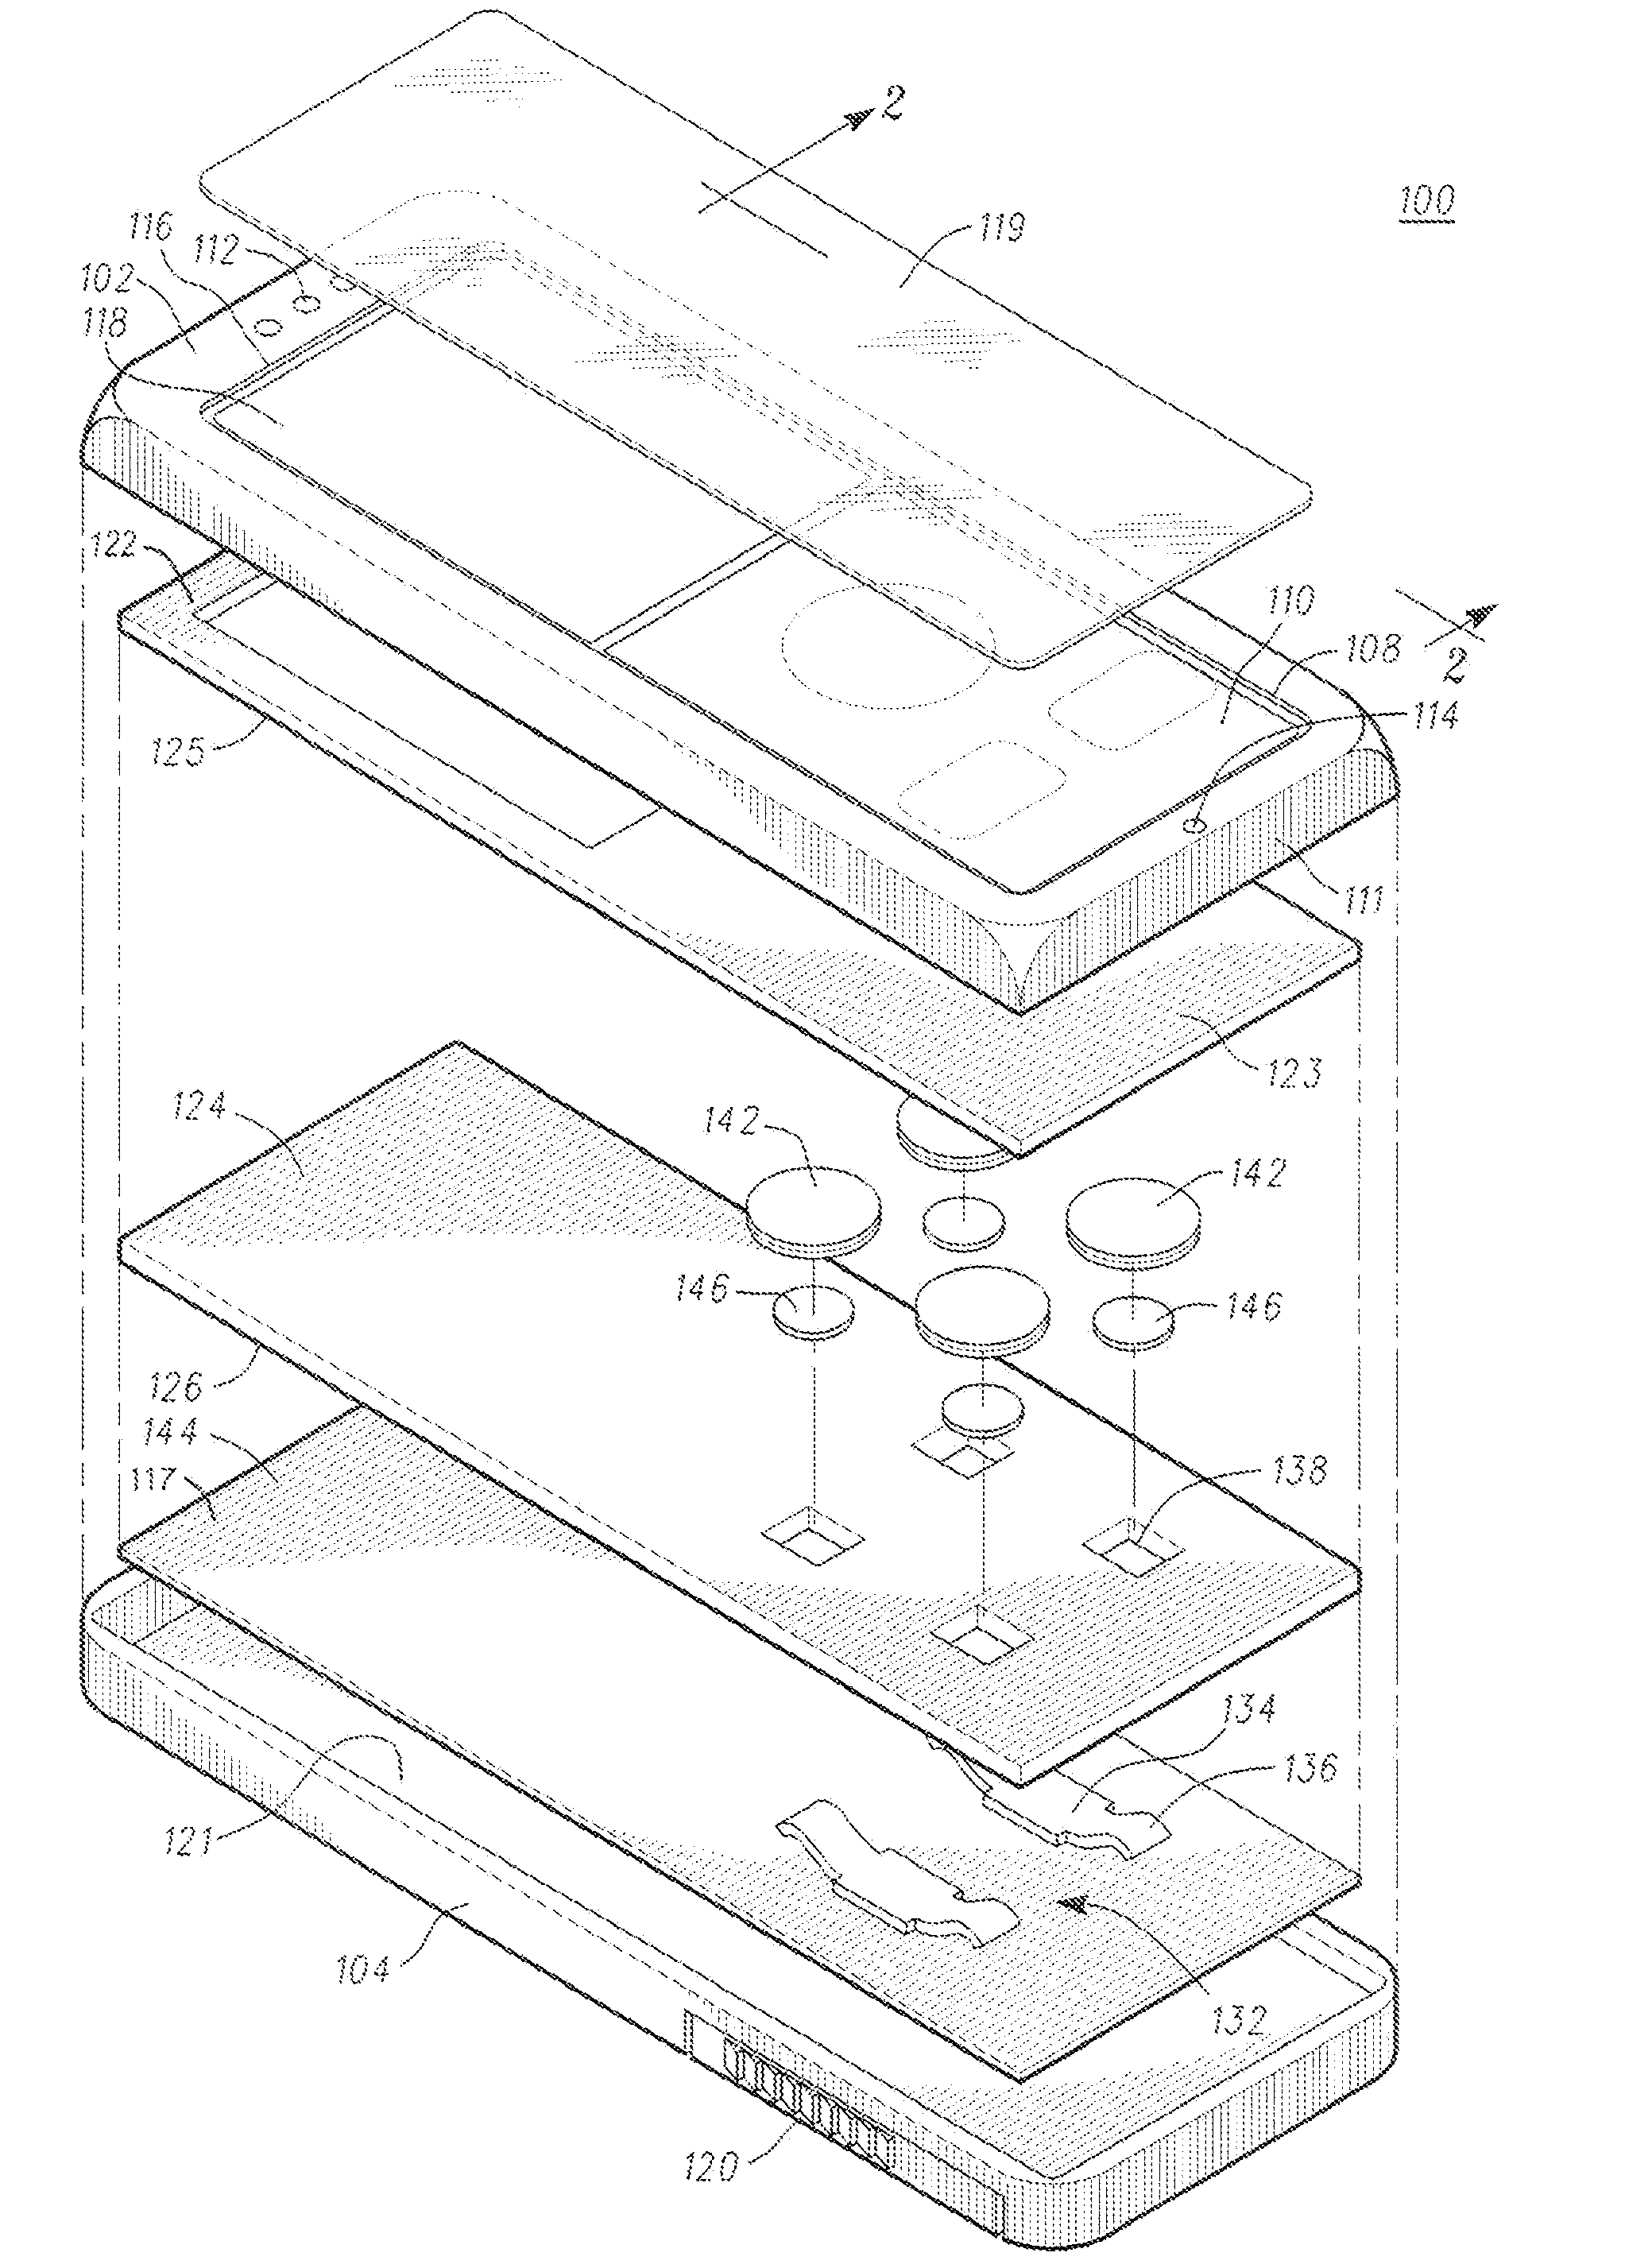 Electronic device and circuit for providing tactile feedback